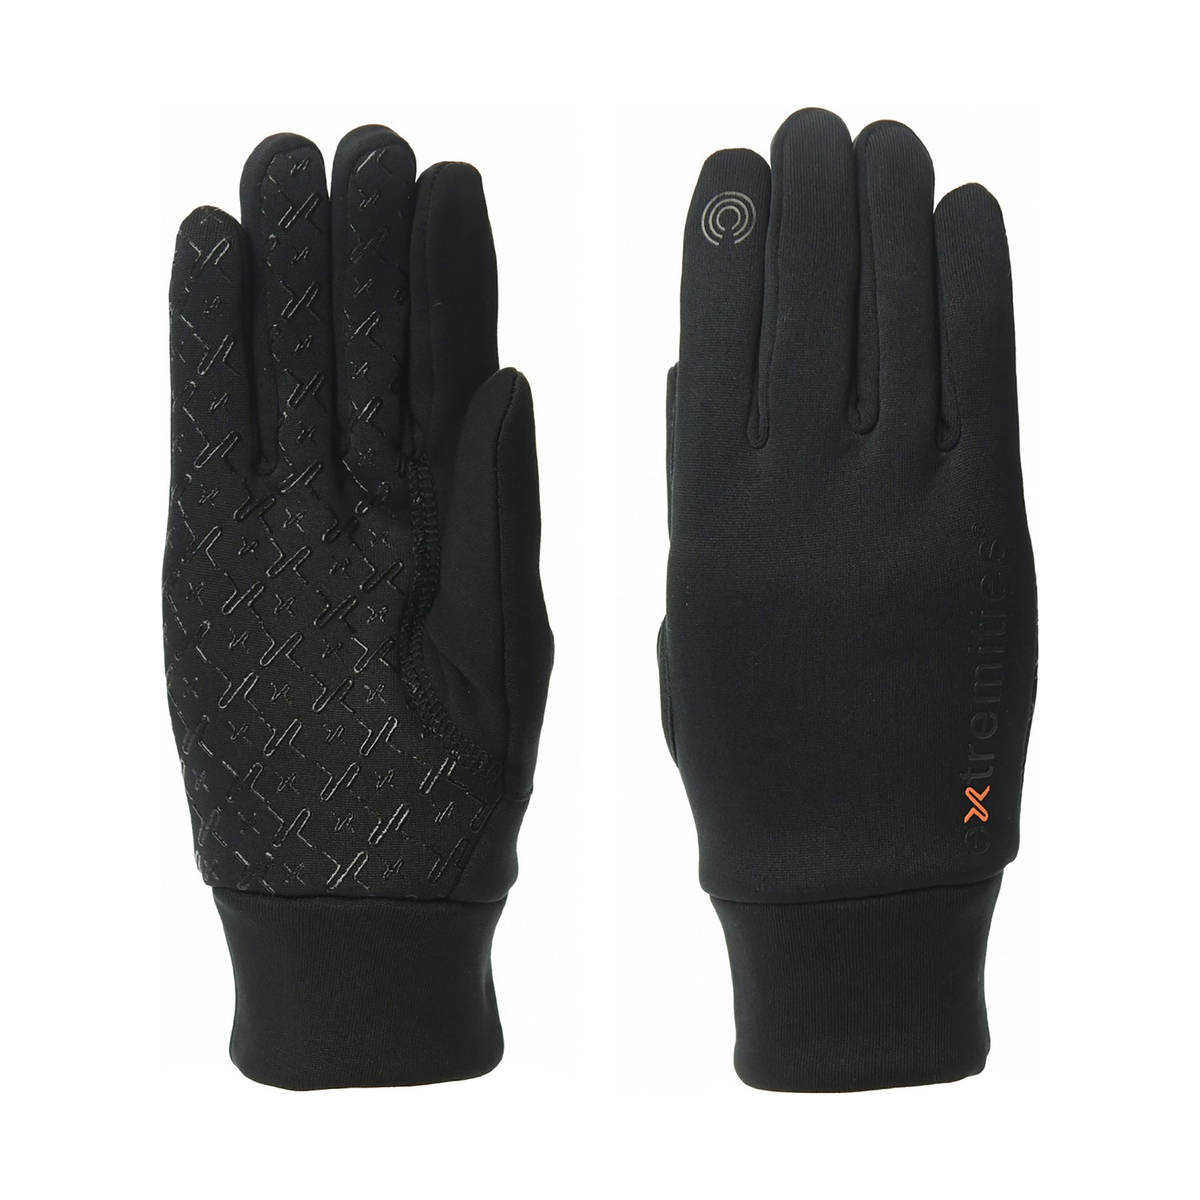 Extremities Sticky Power Liner Touchscreen Glove - Black